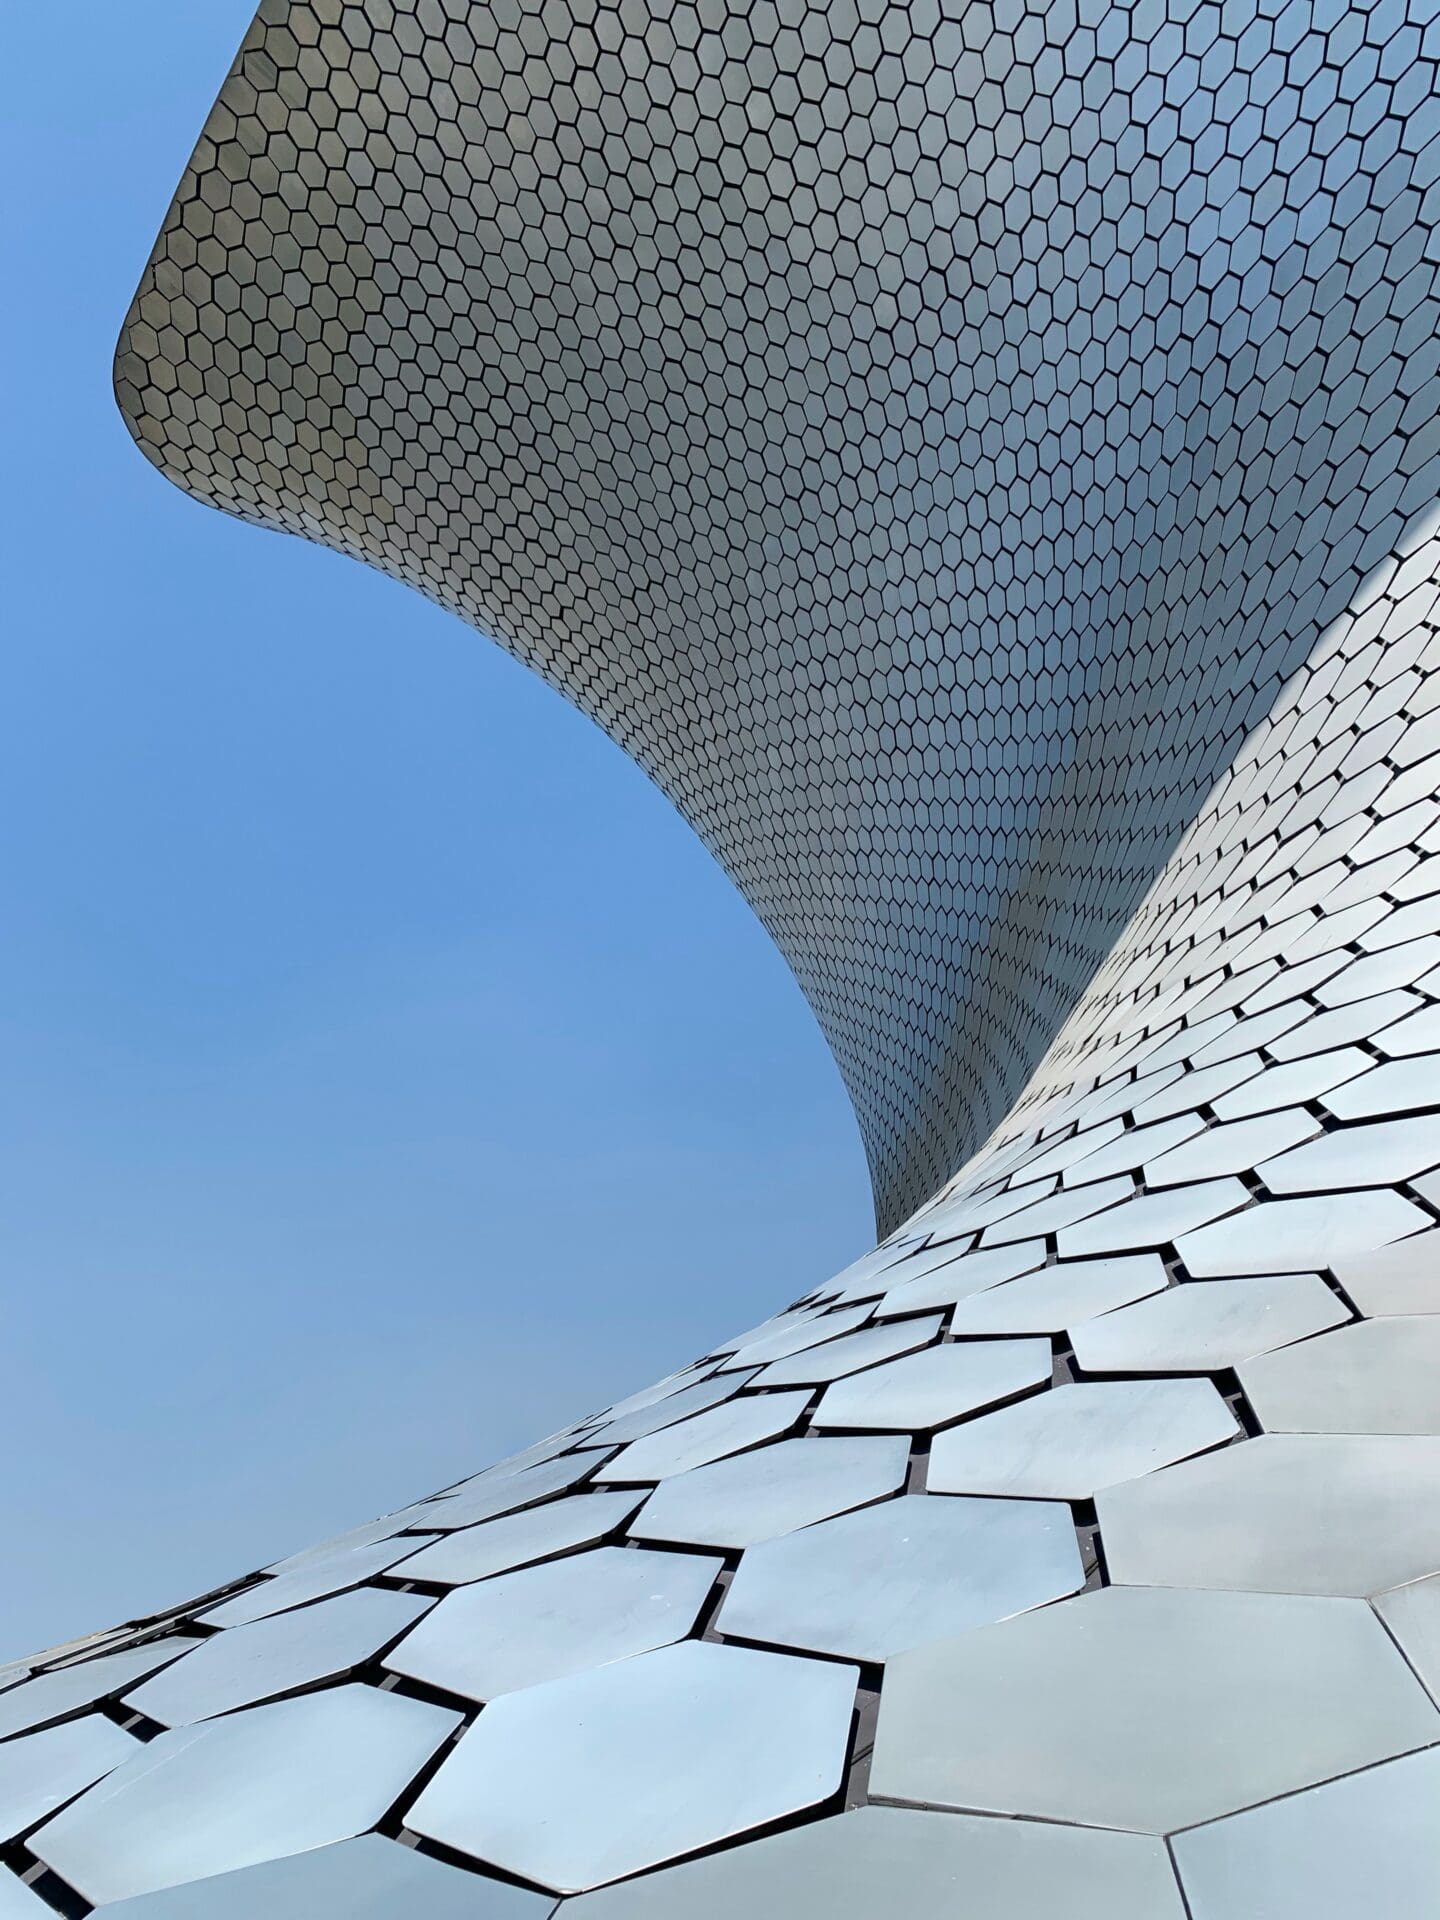 Local's guide to Mexico City | Curved hexagonal metal panels on the side of Mexico City's Museo Soumaya